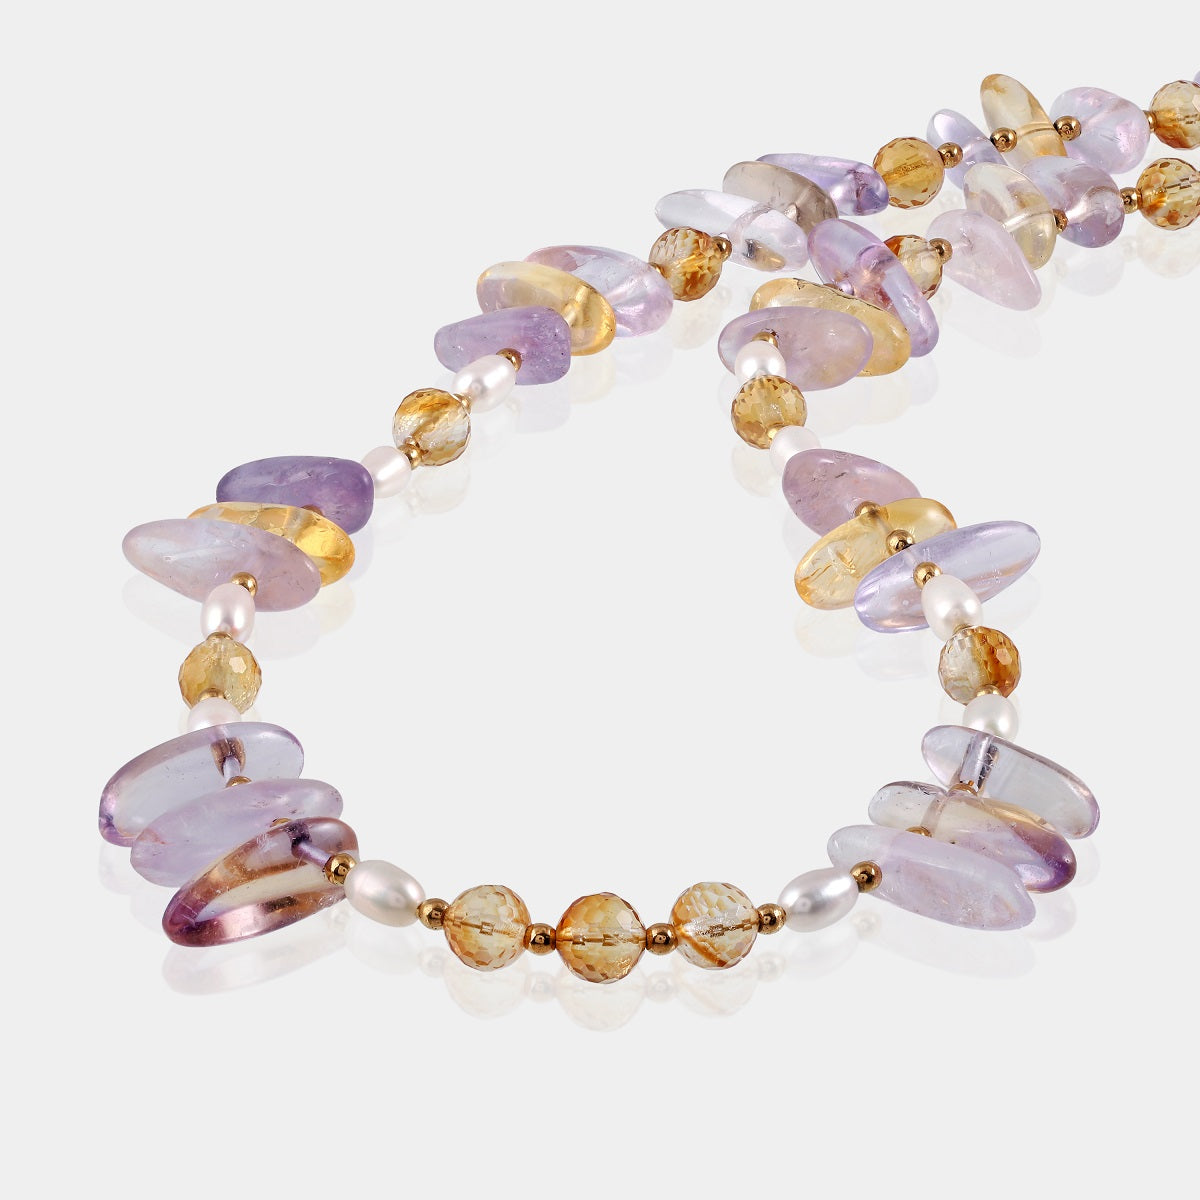 Natural Ametrine, Citrine, Pearl, and Hematite Necklace - Elegance and Positivity